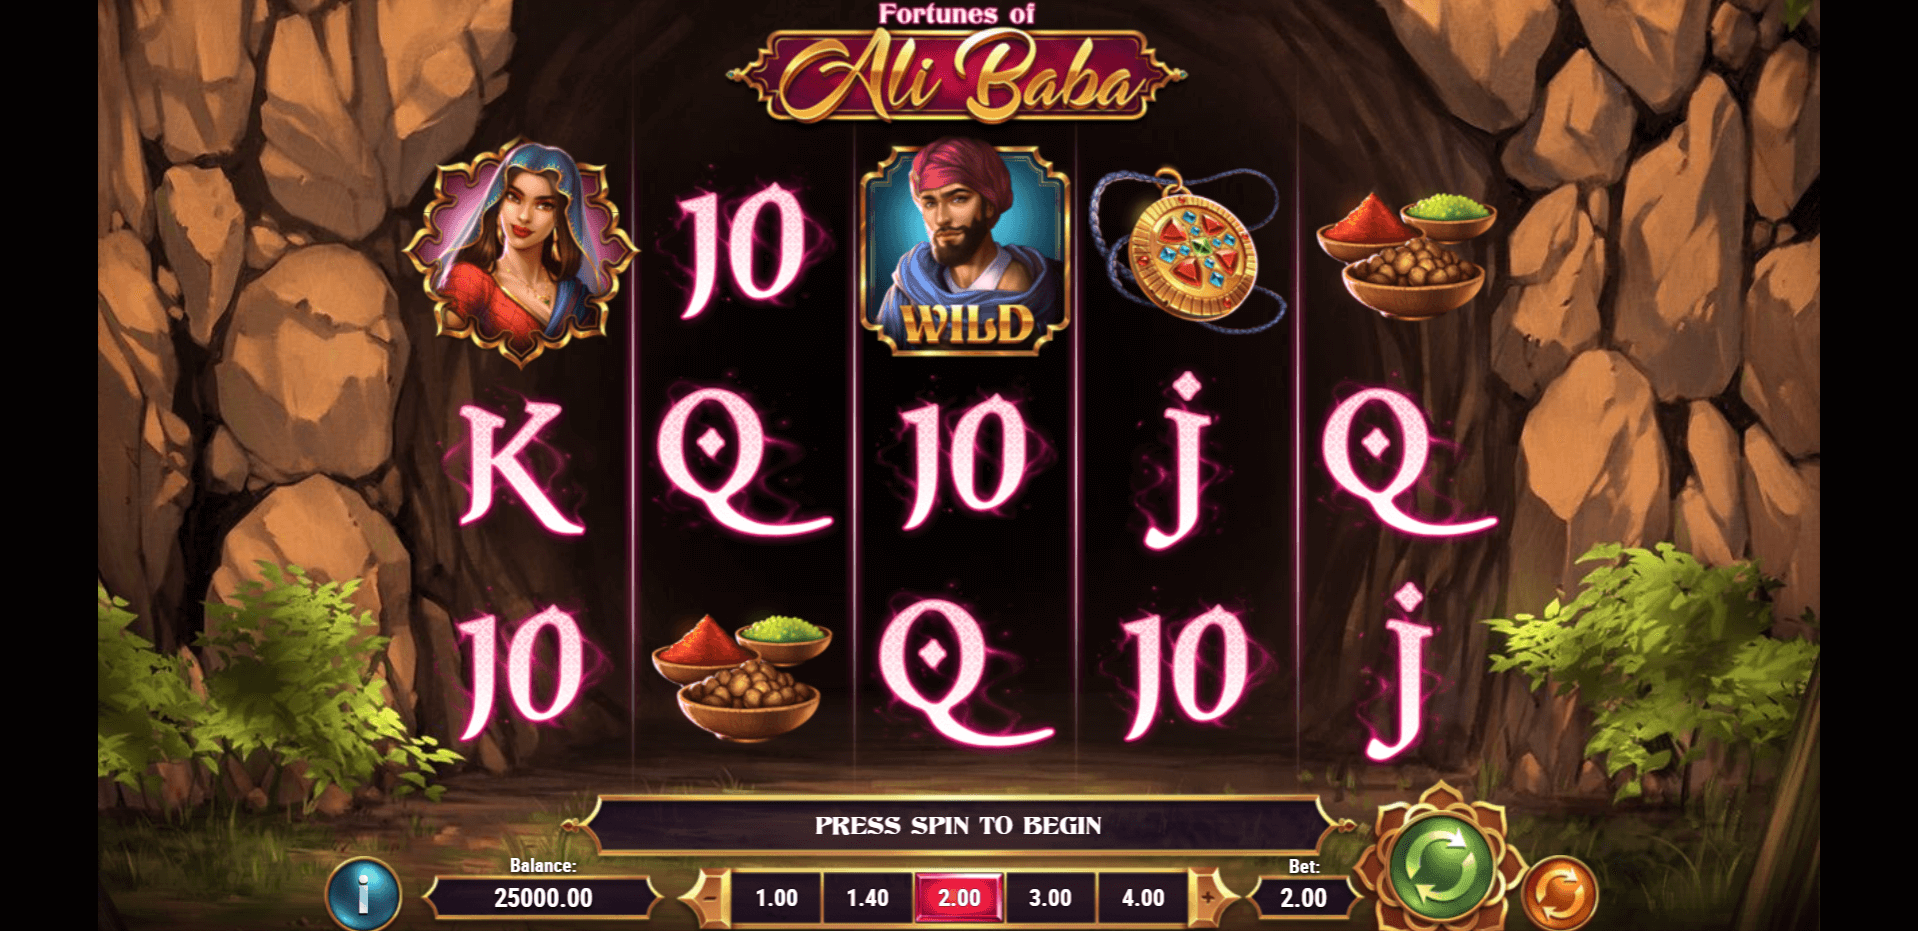 Fortunes of Alibaba slot play free